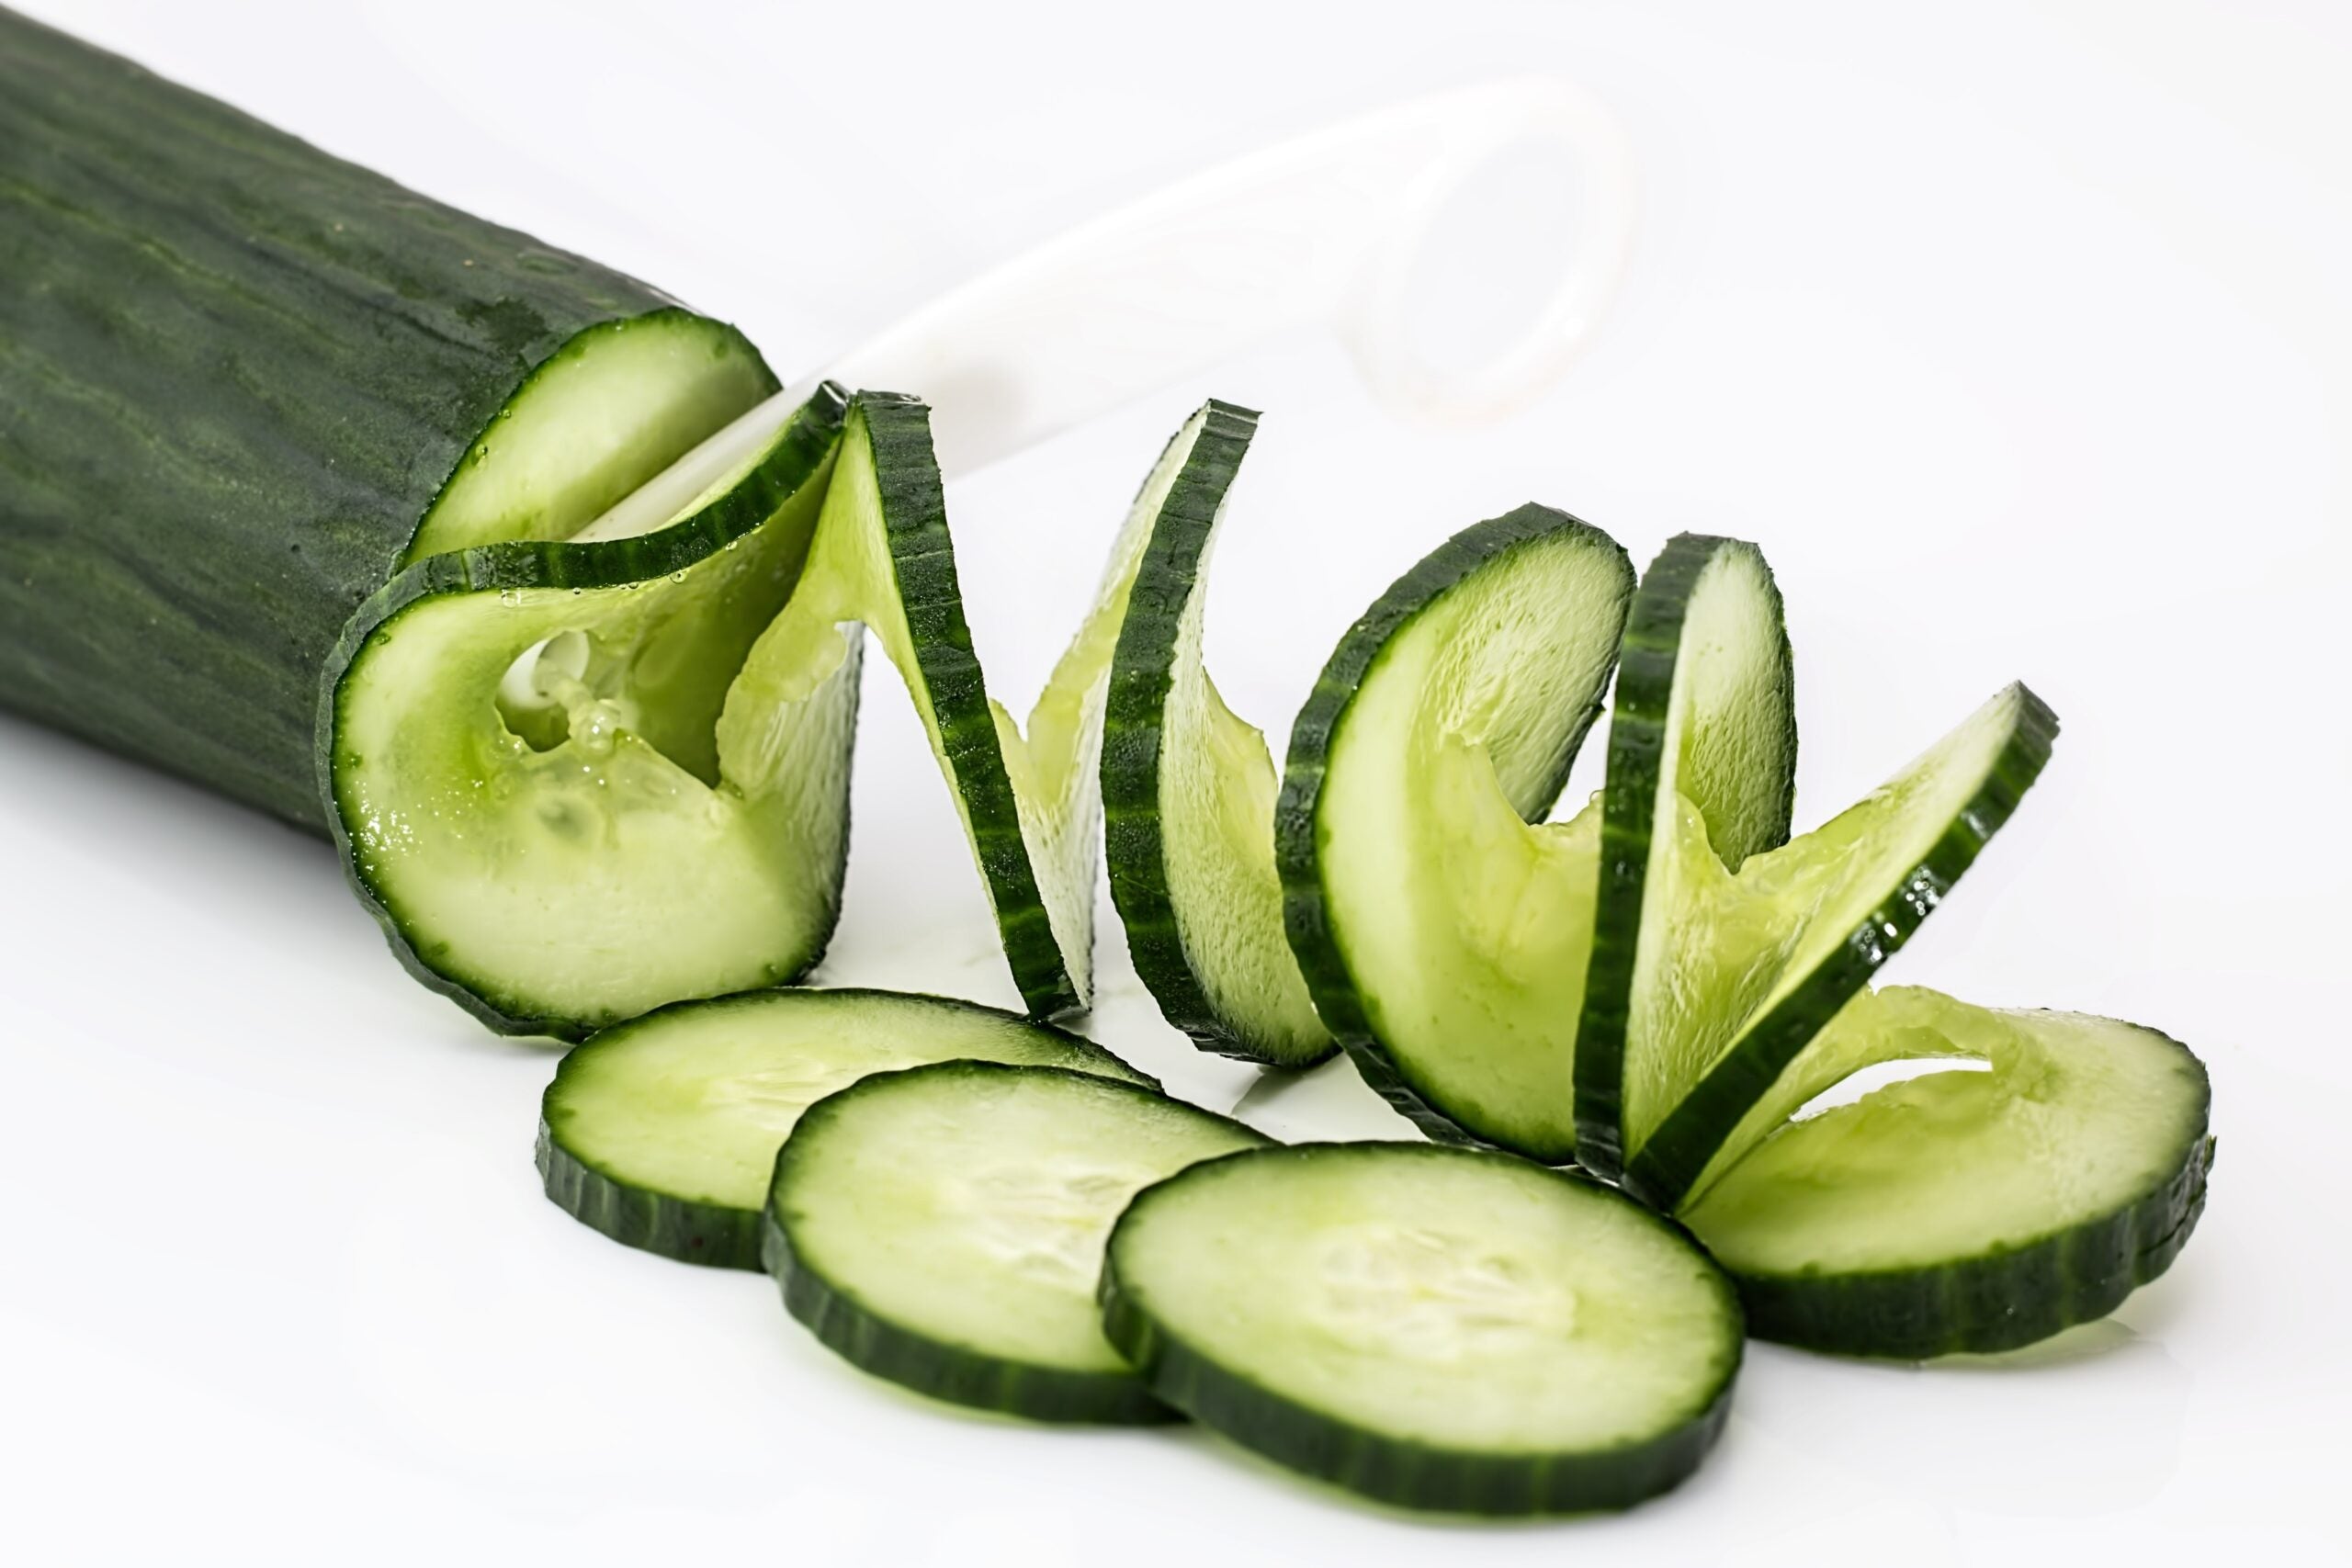 Cucumbers may be the reason for this salmonella outbreak, according to officials